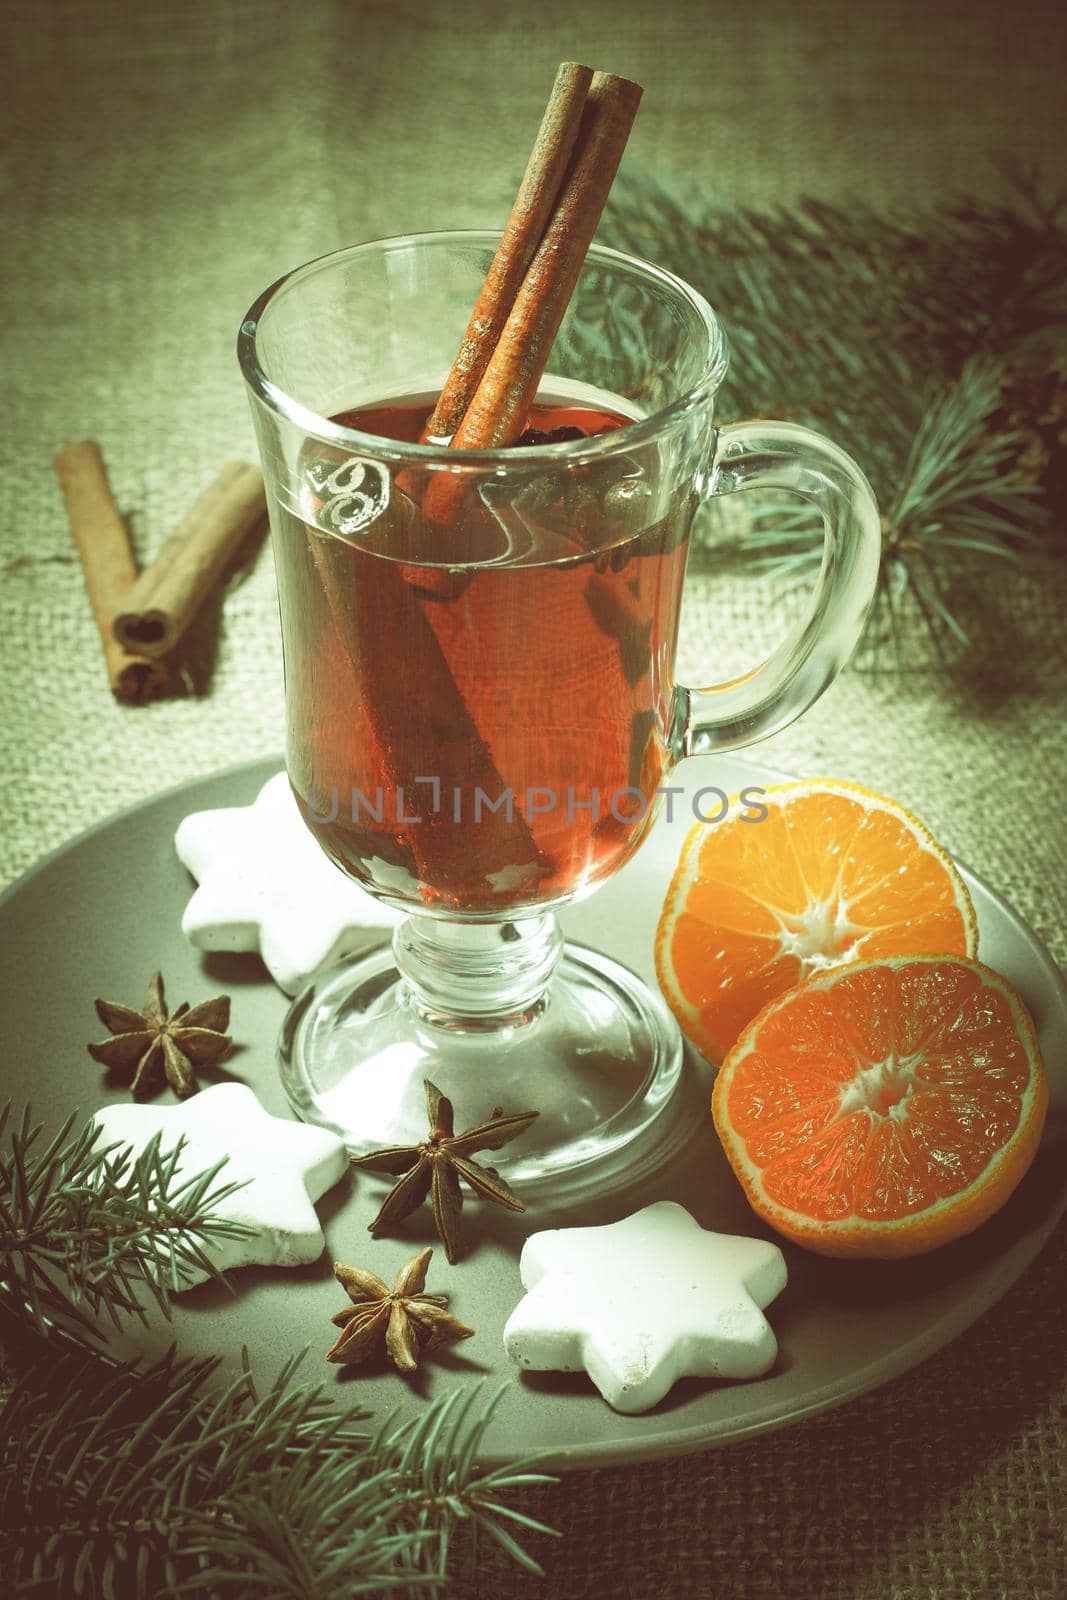 Glass of Christmas mulled wine with cinnamon, star anise and cloves on plate with slices of orange, white biscuits and natural fir tree branches on the background. Color toning effect.